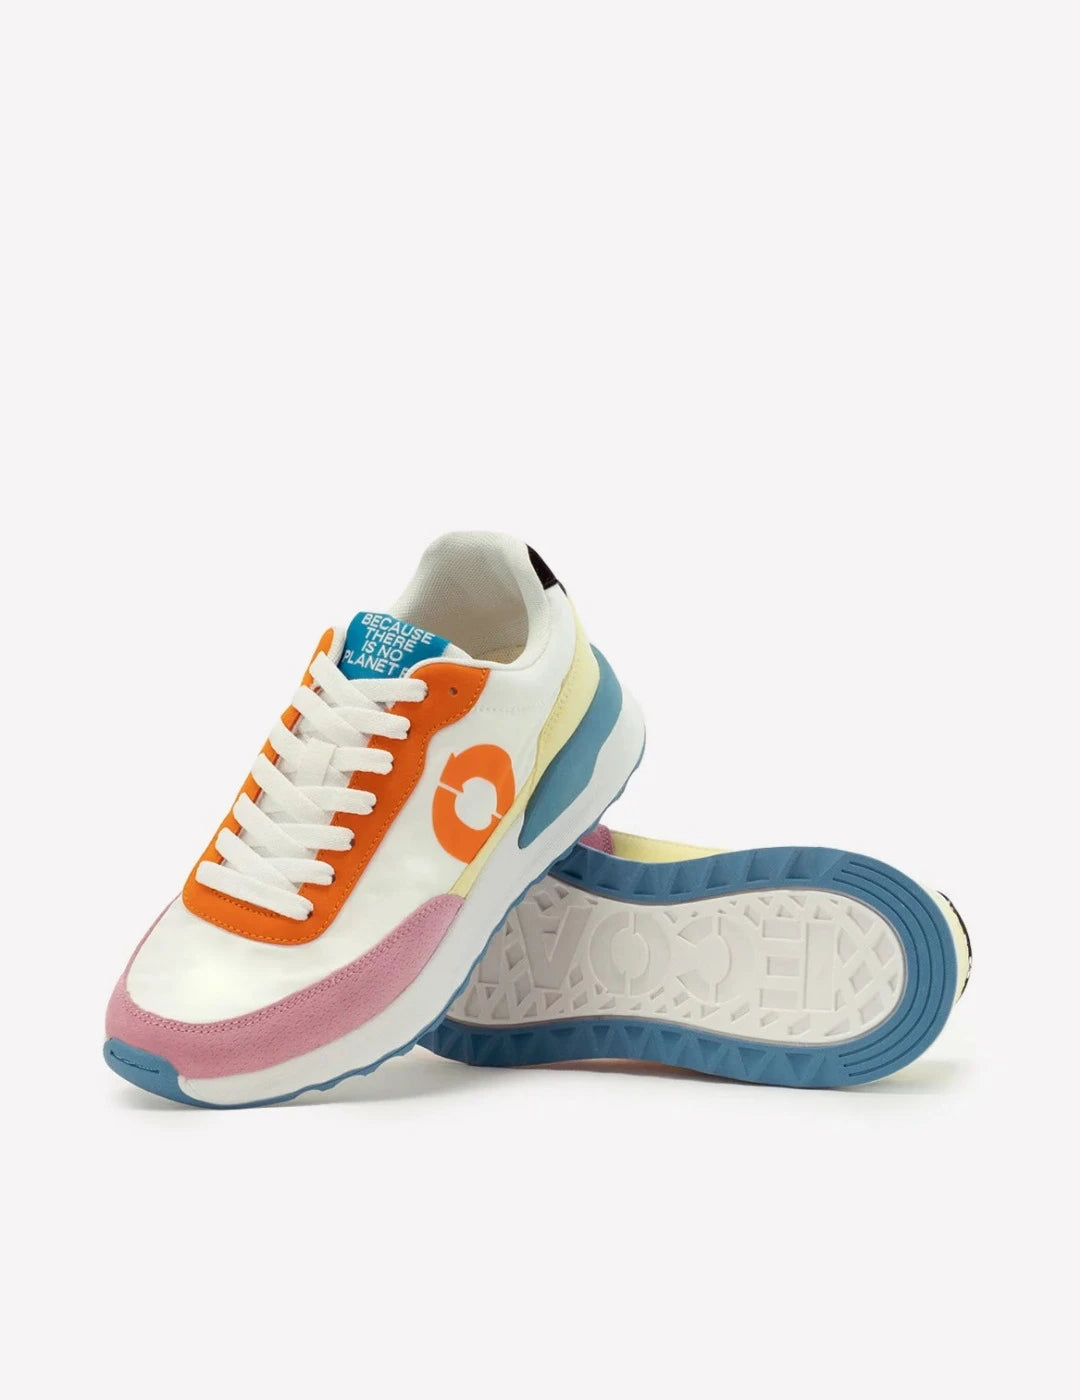 WOMAN PRINCE SNEAKERS - OFF WHITE/PINK